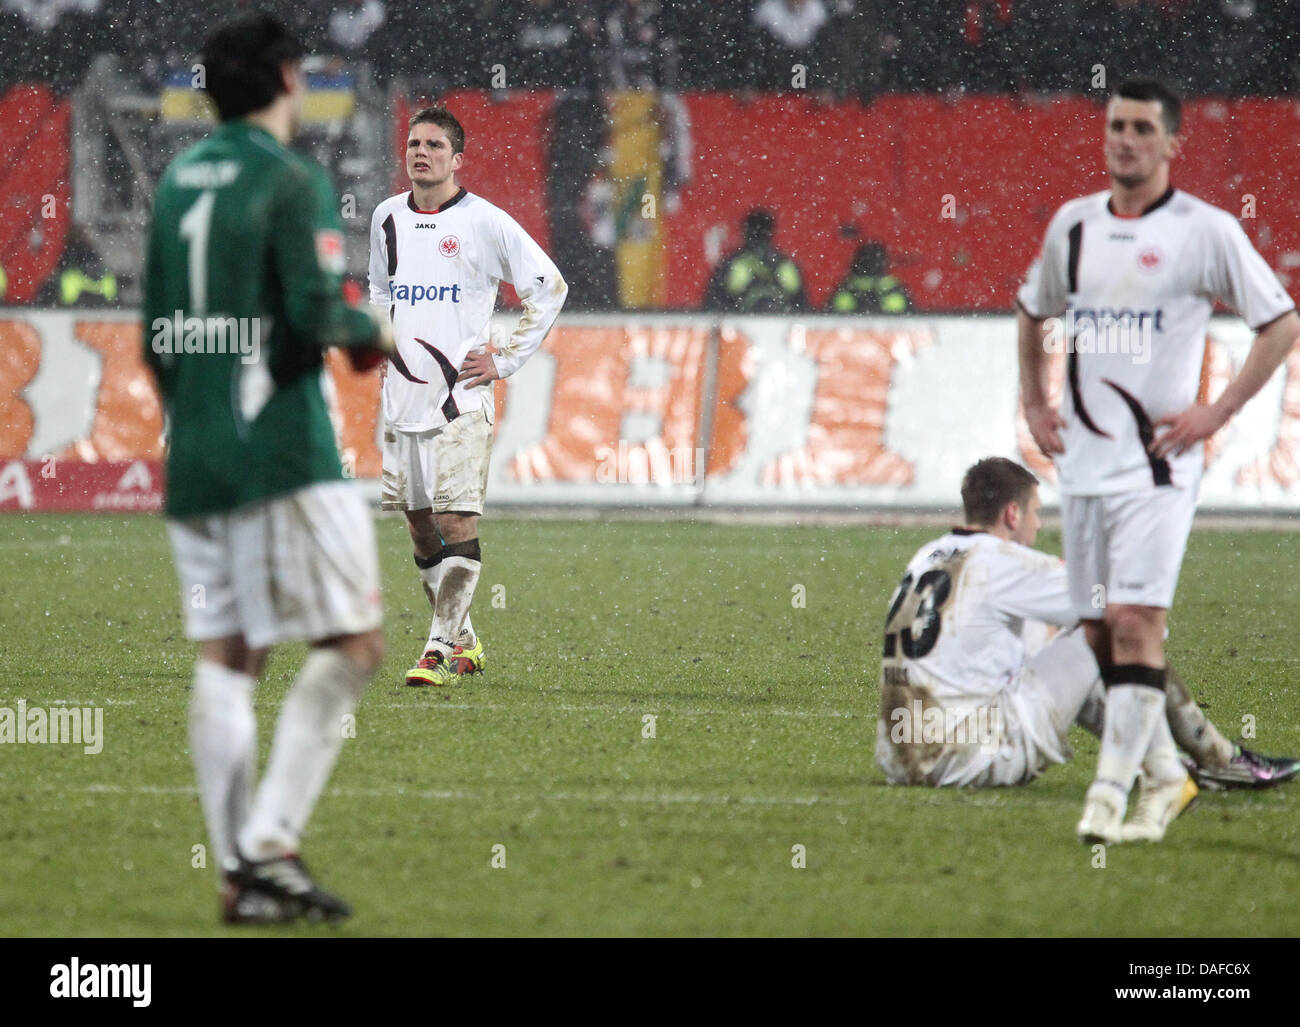 Frankfurt's players stand disappointed on the pitch after the final whistle in the Bundesliga soccer match between  1st FC Nuremberg vs Eintracht Frankfurt  1st FC Nuremberg vs Eintracht Frankfurt at the easyCredit soccer stadium in Nuremberg, Germany, 18 February 2011. Nuremberg won 3-0. Photo: Daniel Karmann Stock Photo